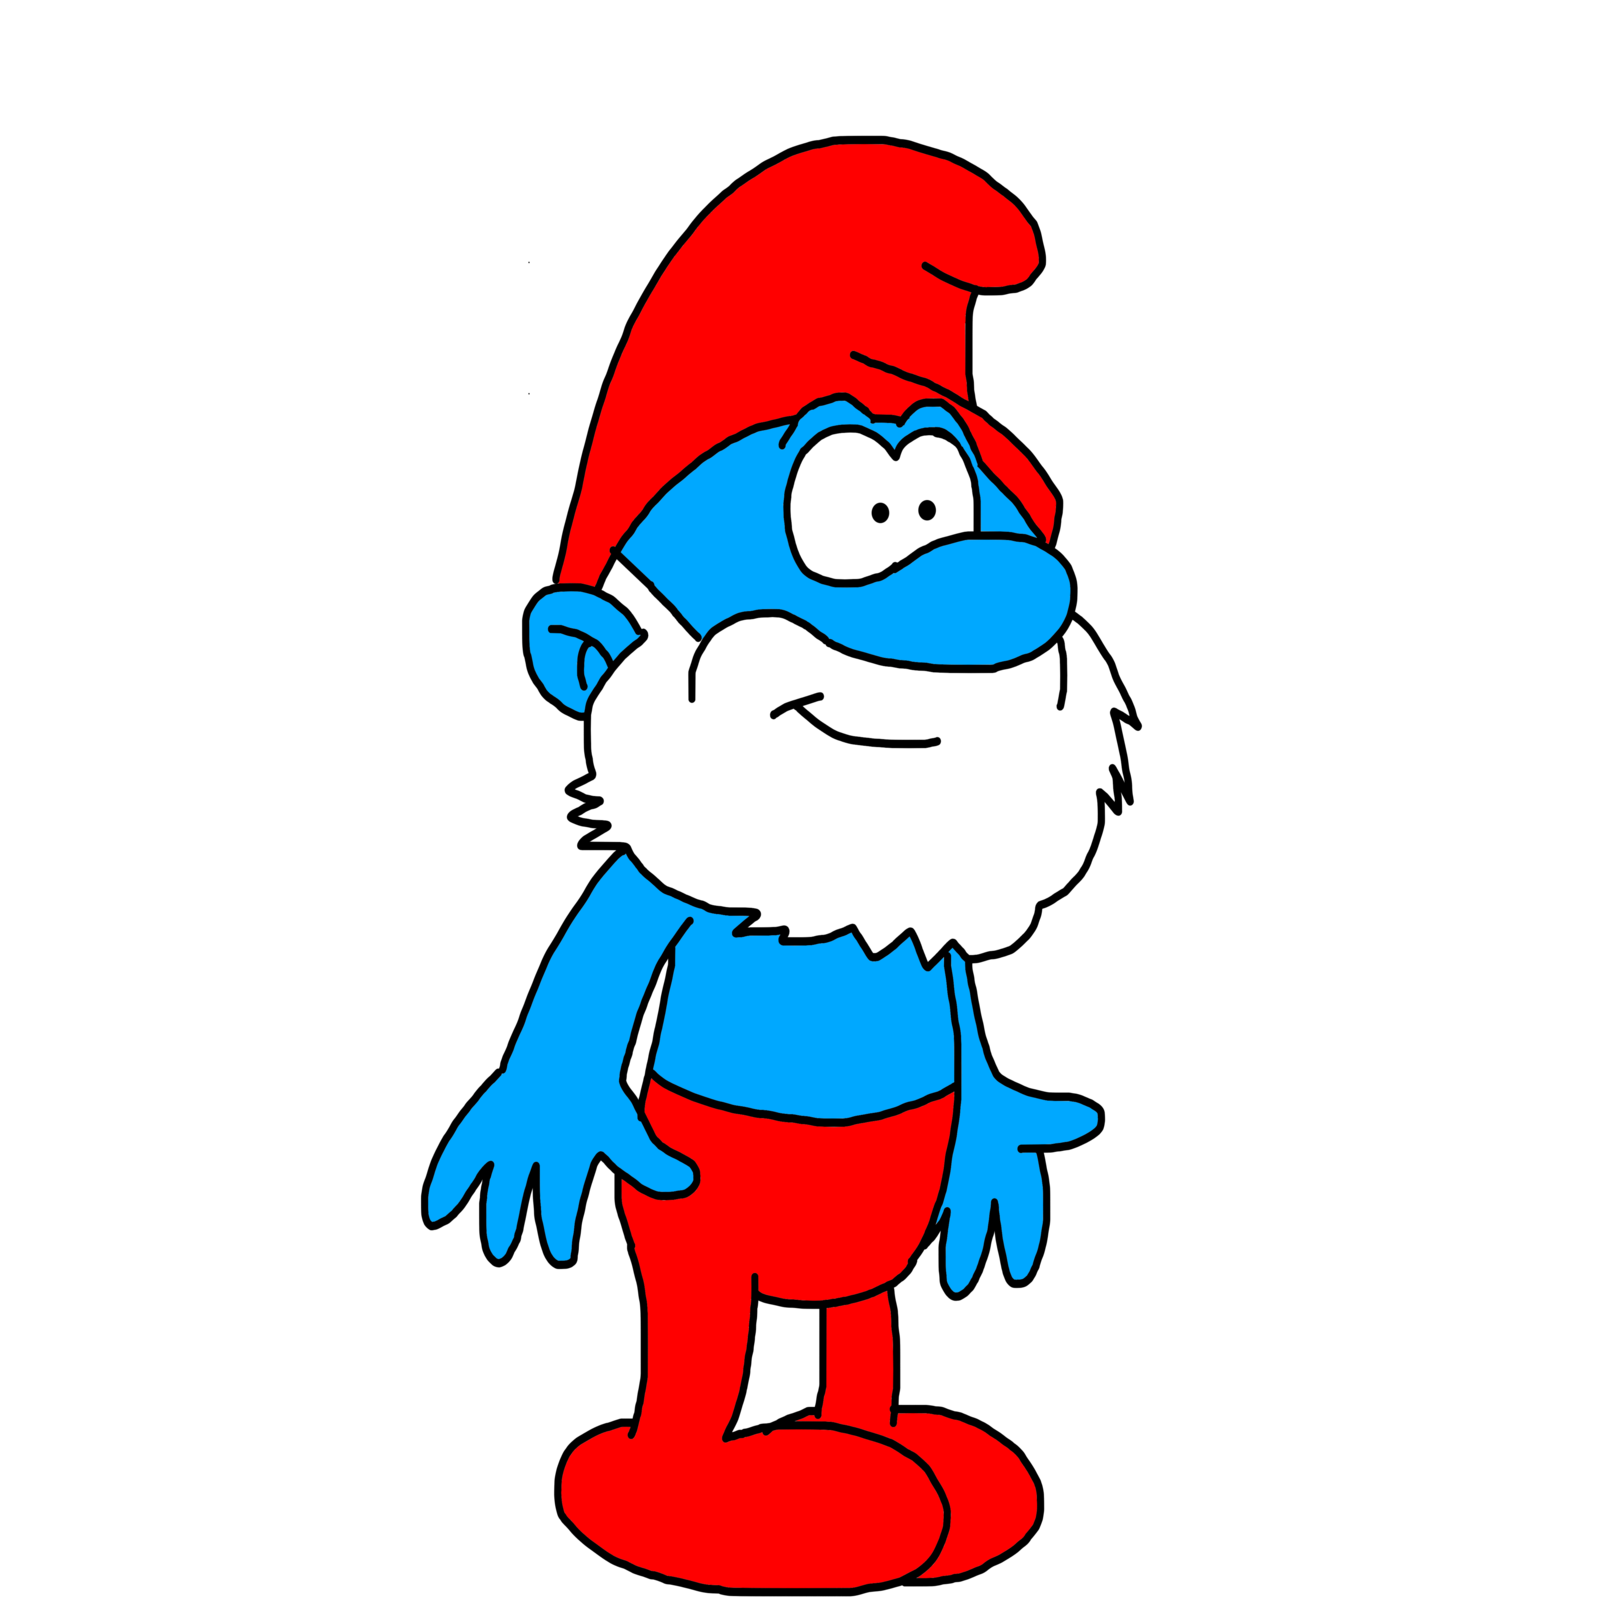 Papa Smurf Wallpaper HD Picture Pictures